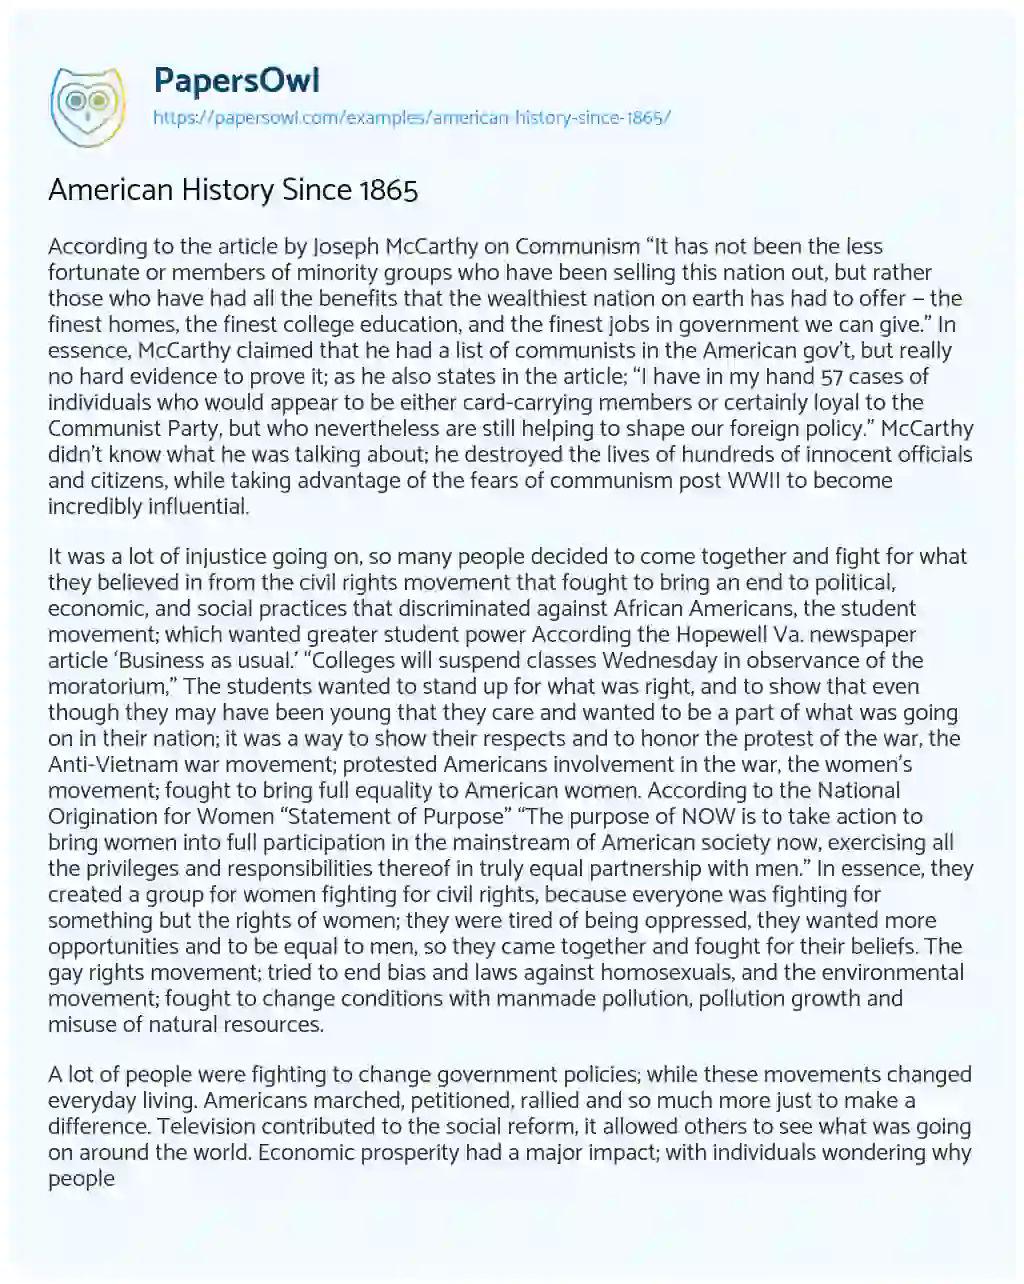 Essay on American History Since 1865